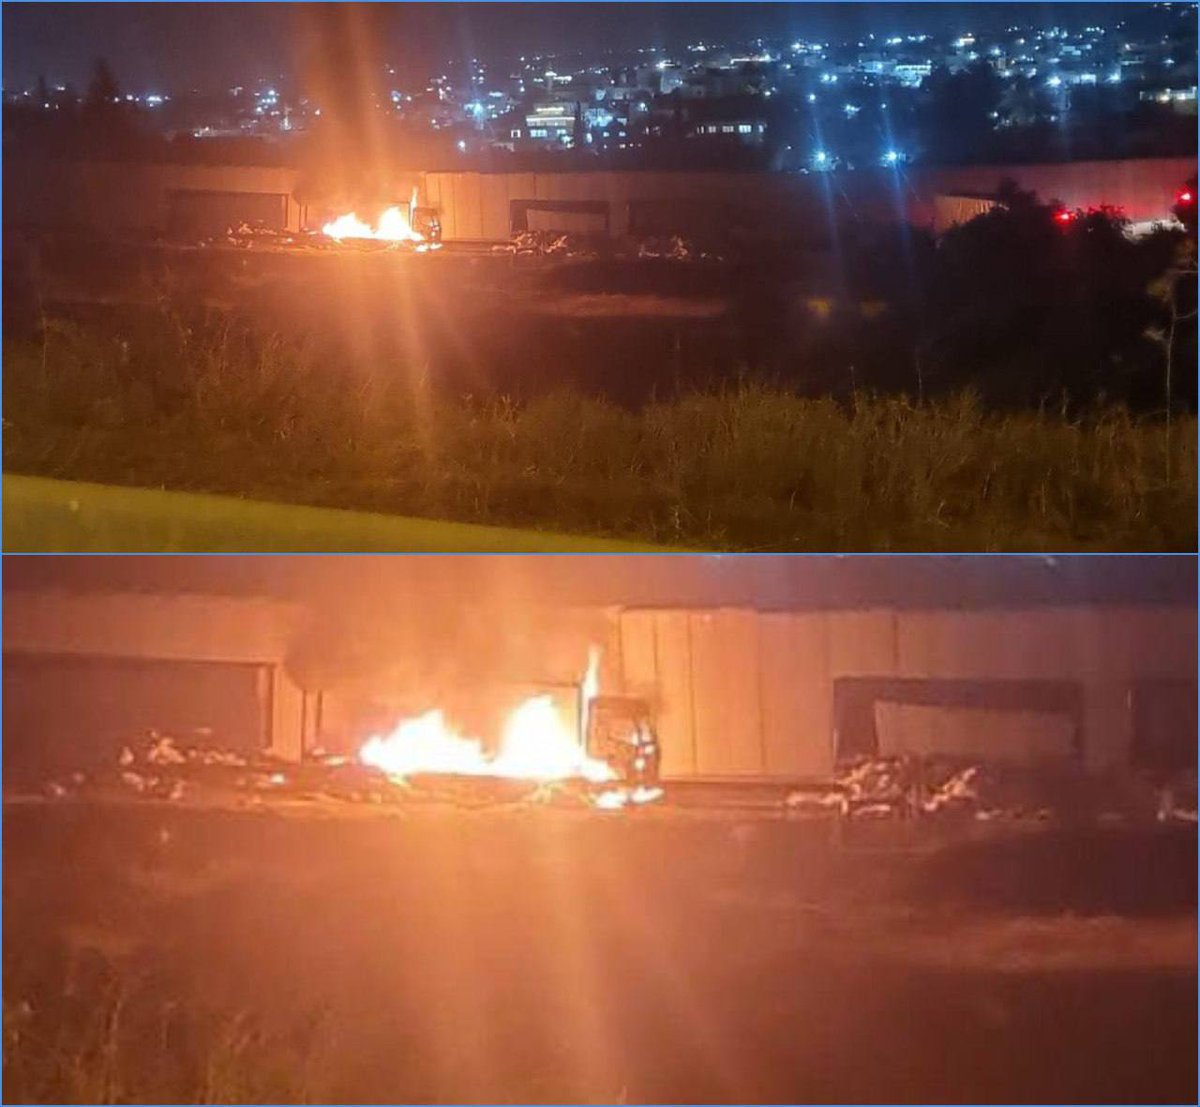 Israeli settler mobs have launched attacks on humanitarian aid convoys traveling to the Gaza Strip from Jordan, setting trucks on fire. These attacks occur with the complete disappearance of Israeli forces and authorities, suggesting full collaboration between the Israeli